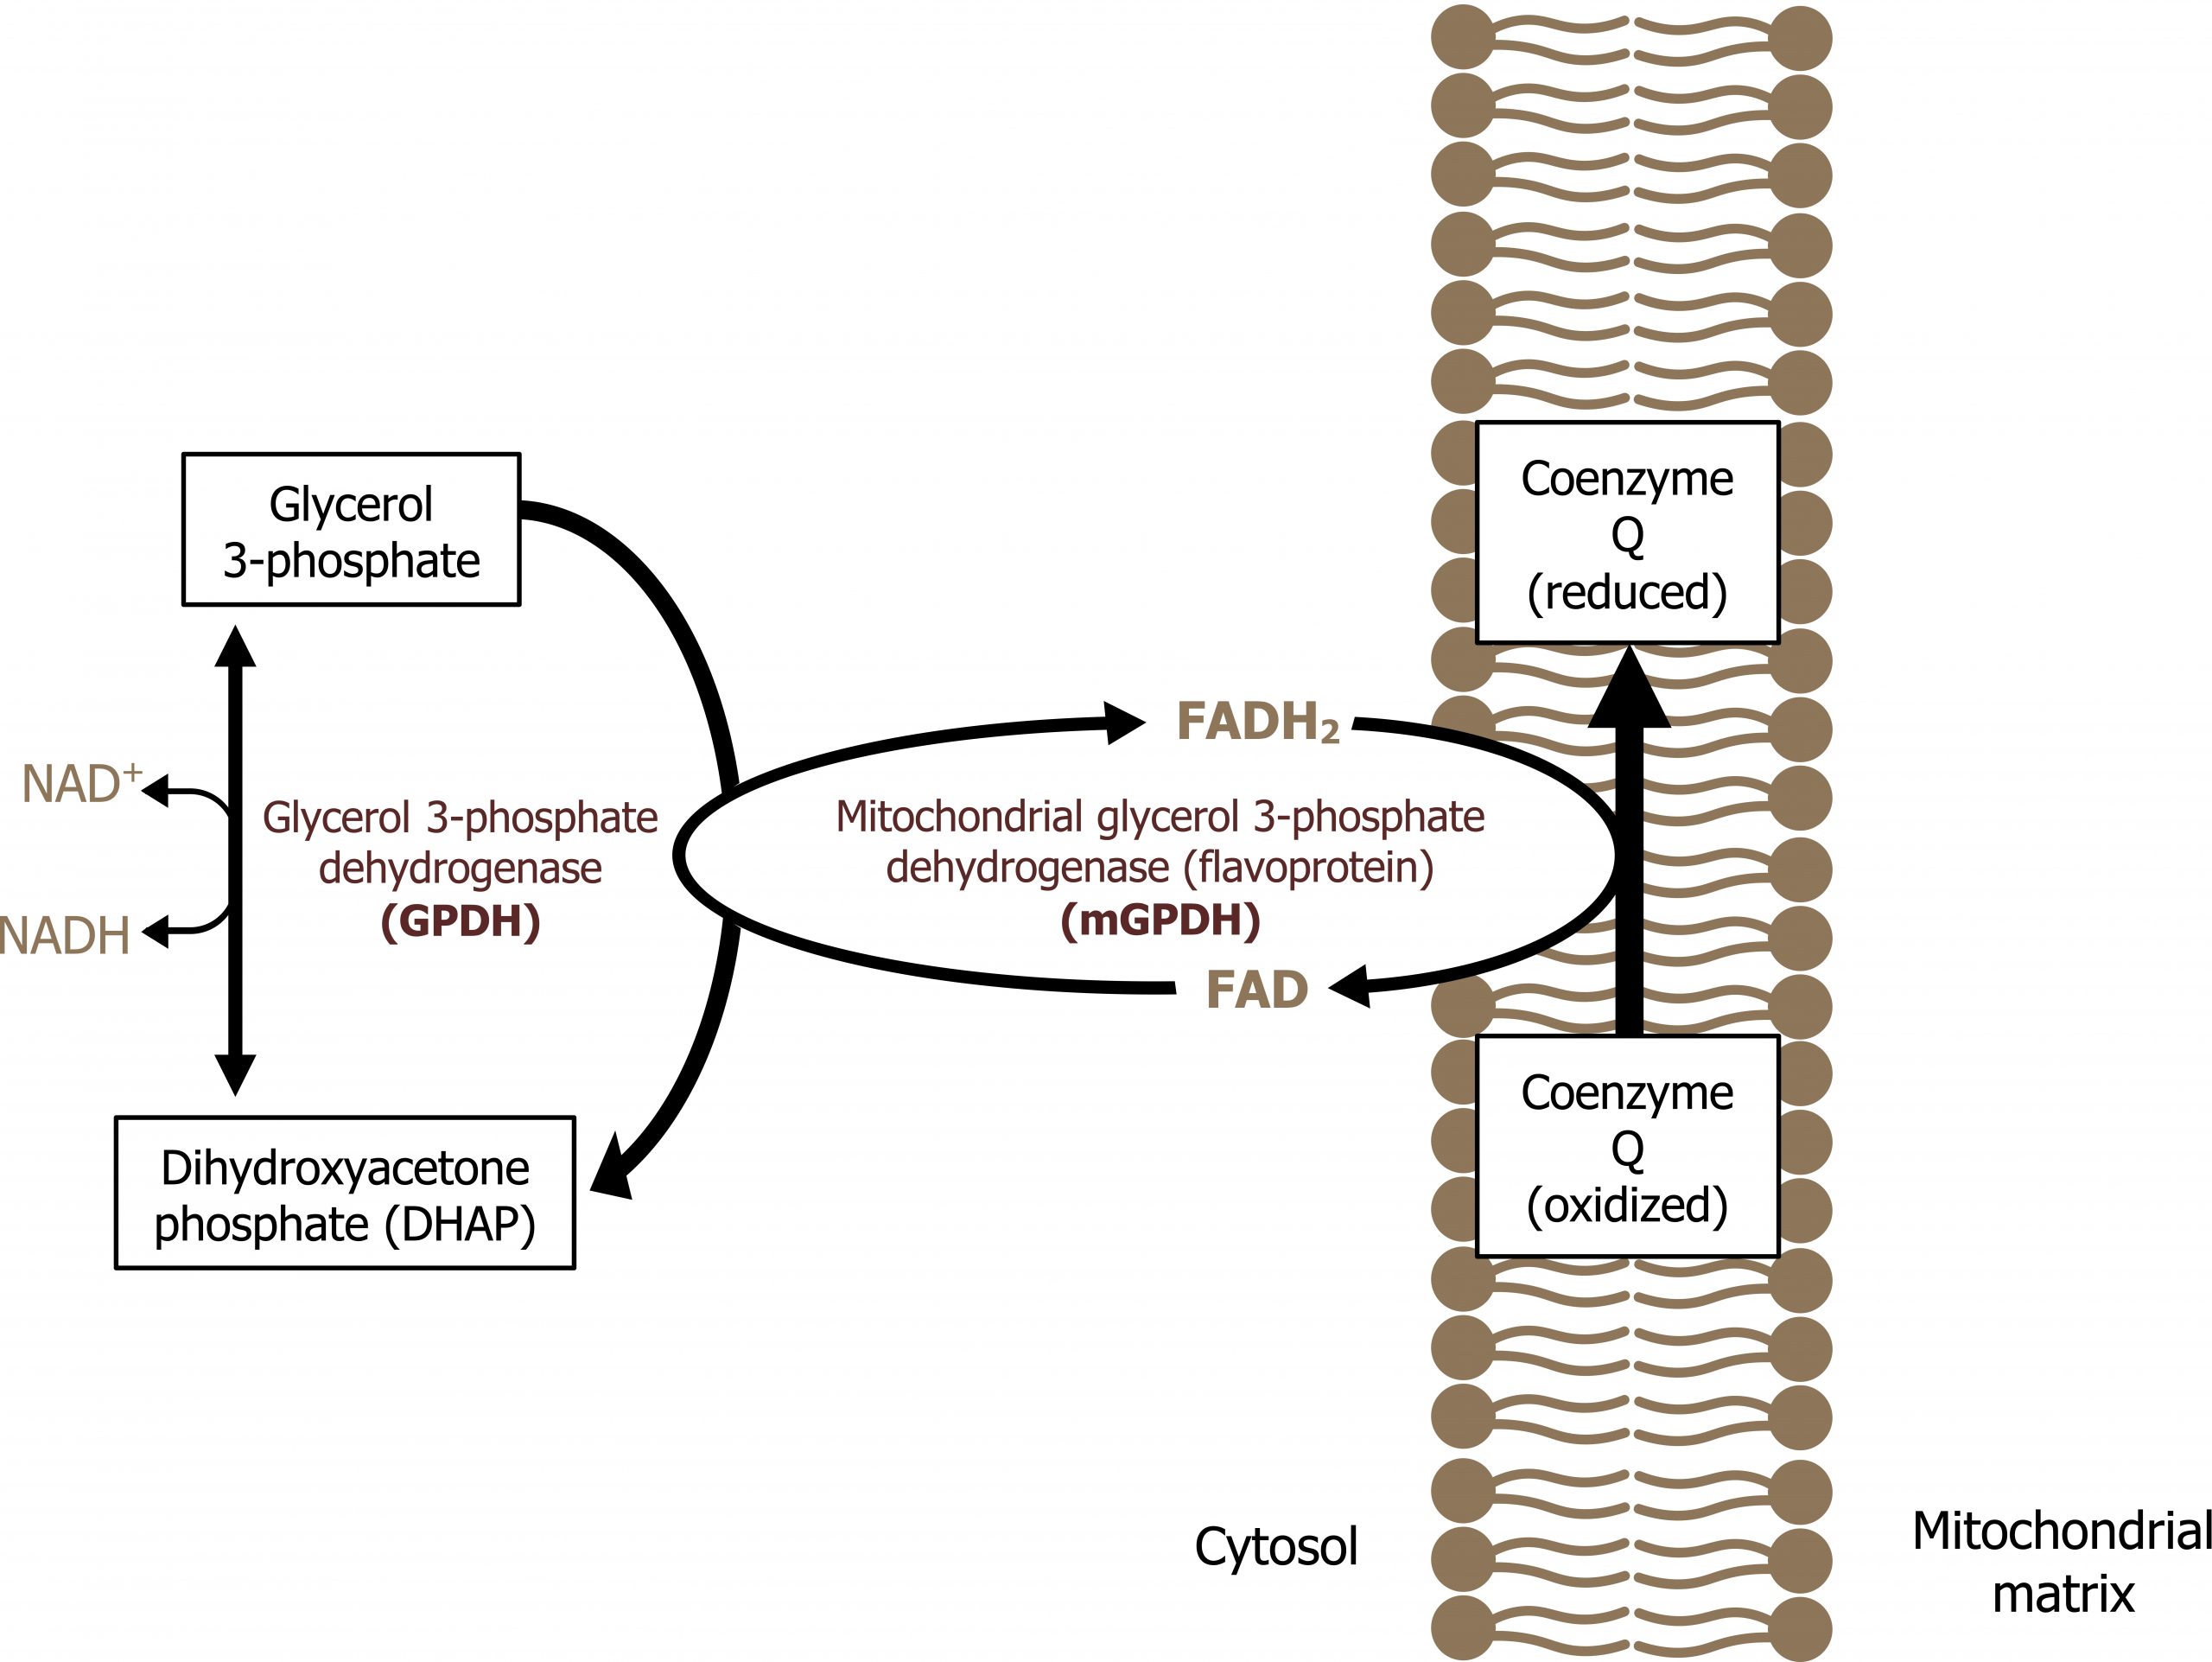 Left: Glycerol 3-phosphate bidirectional arrow with enzyme glycerol 3-phosphate dehydrogenase (GPDH) and NADH bidirectional arrow NAD+ to dihydroxyacetone phosphate (DHAP). Glycerol 3-phosphate second arrow to DHAP. Right: A vertical plasma membrane separating the cytosol (left) and mitochondrial matrix (right) with Coenzyme Q (oxidized) arrow pointing up to Coenzyme Q (reduced). Middle: Clockwise circular arrows between FADH2 and FAD with enzyme mitochondrial glycerol 3-phosphate dehydrogenase (flavoprotein) (mGPDH). The circular arrows are touching the second arrow from glycerol 3-phosphate to DHAP and the arrow between oxidized and reduced coenzyme Q.